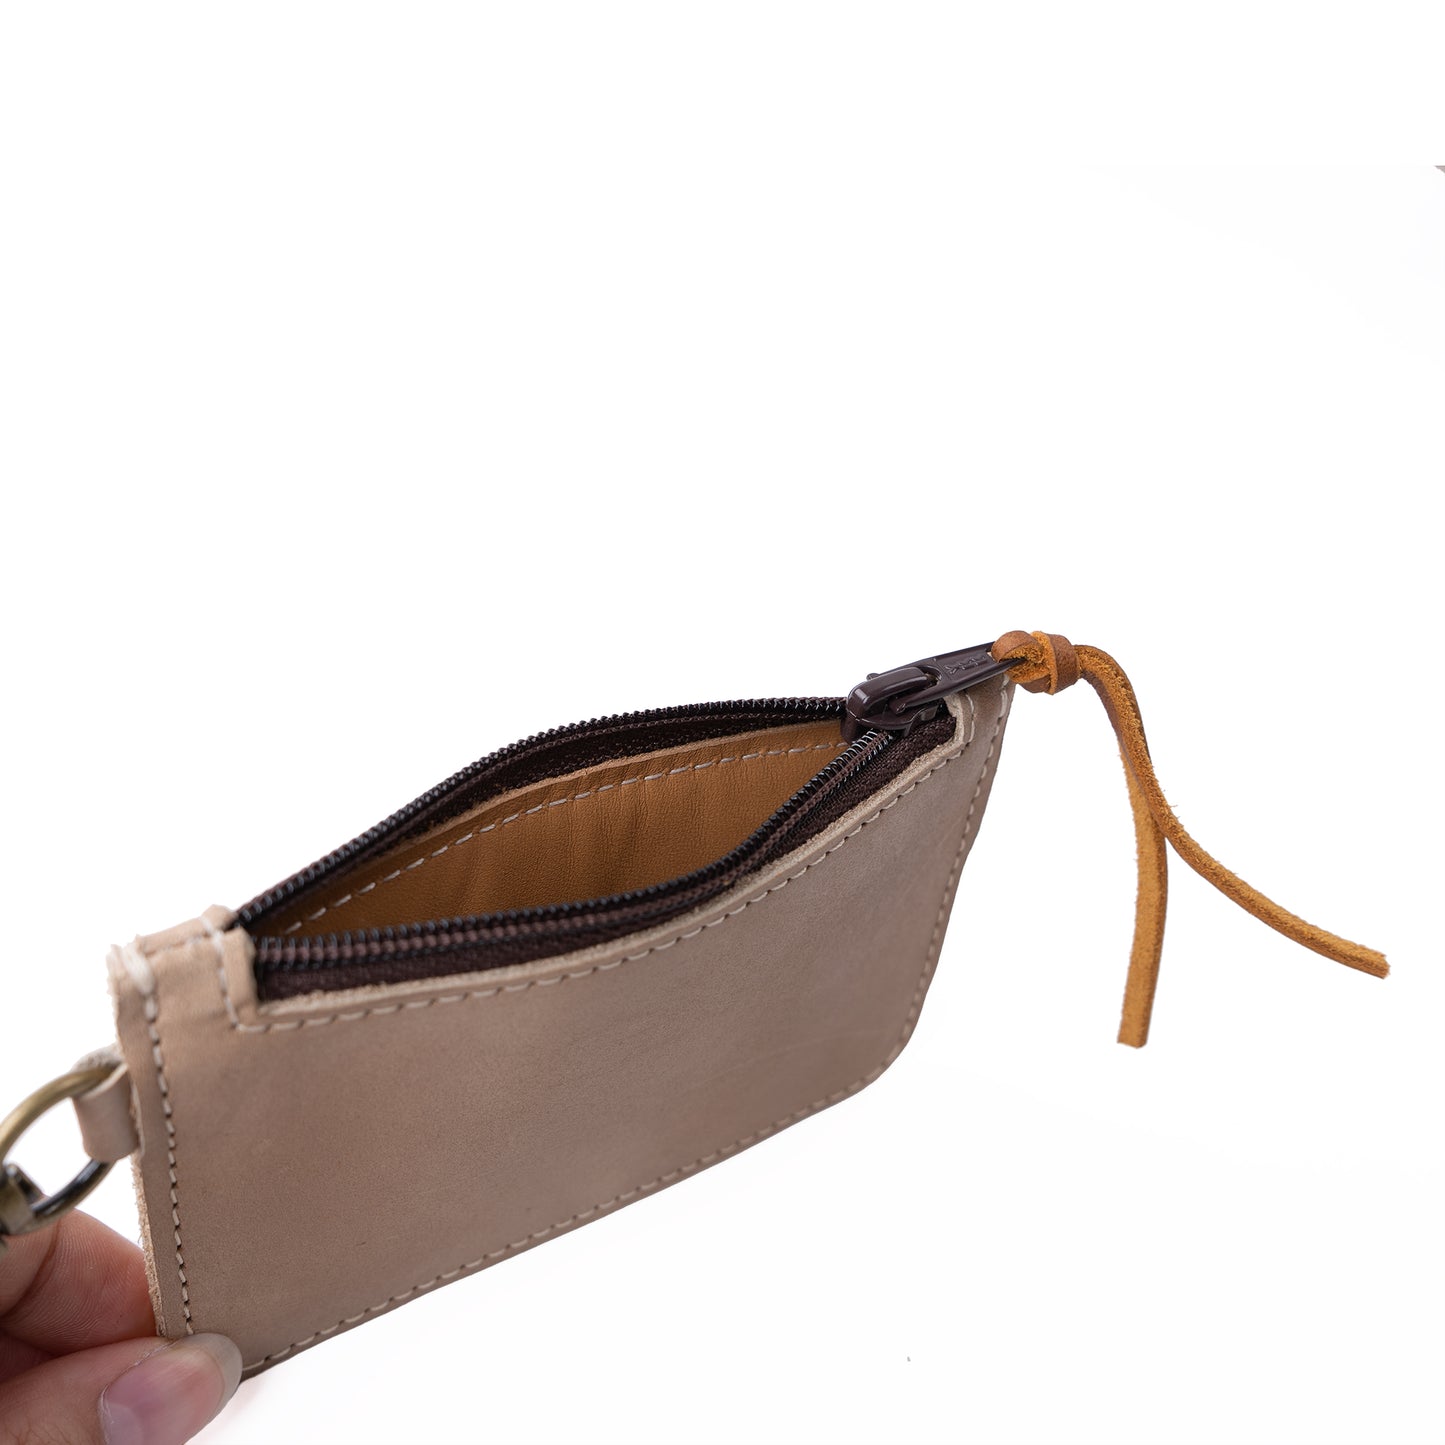 ZIPPED CARD CASE - FULL LEATHER - TAN & CAFE